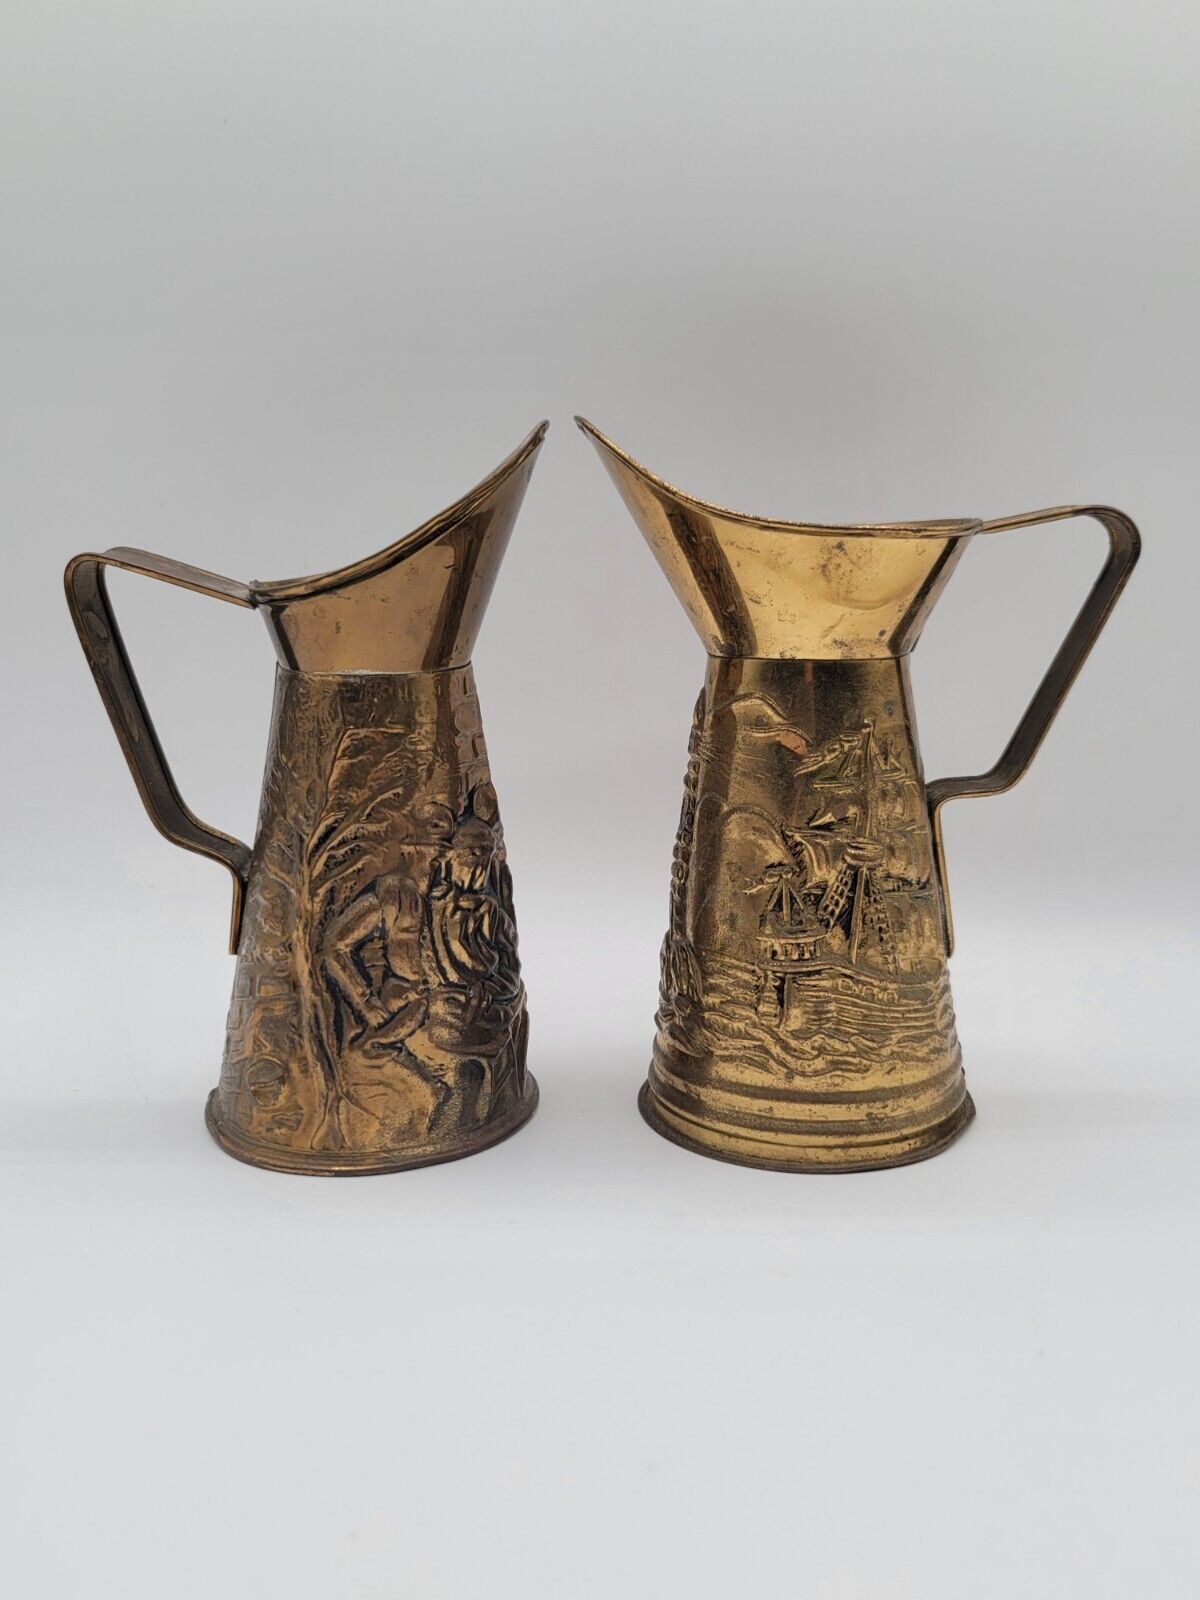 English Brass Plated Embossed Tin Pitchers / Vases Vintage Set of 2